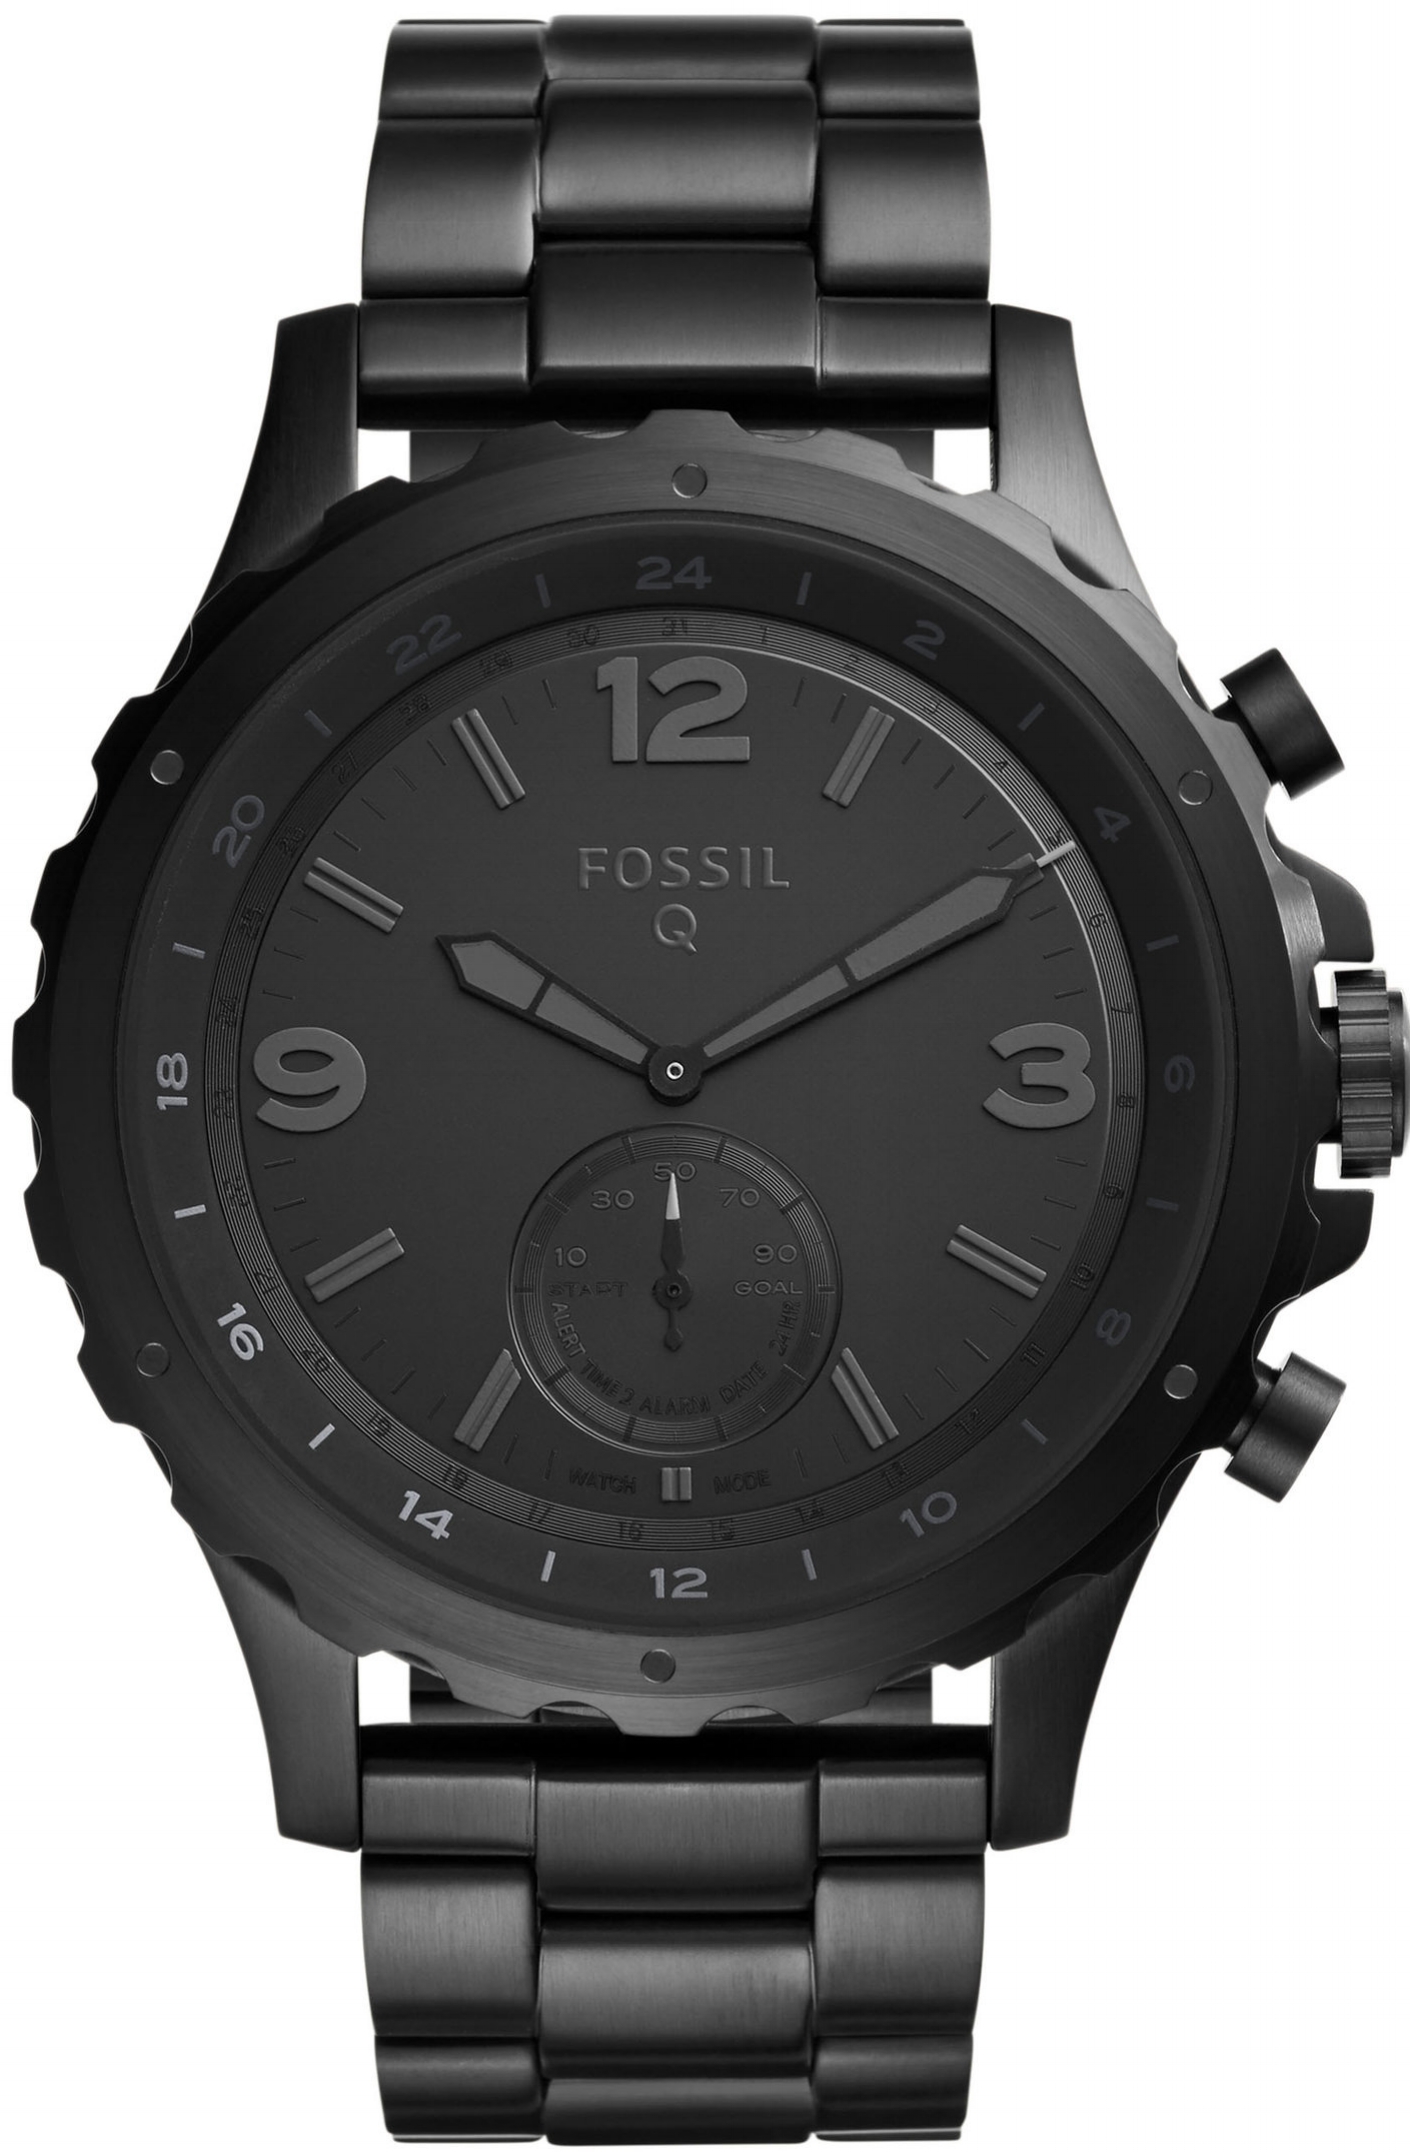 Fossil Q Nate Hybrid Black Stainless Steel Smartwatch, $215